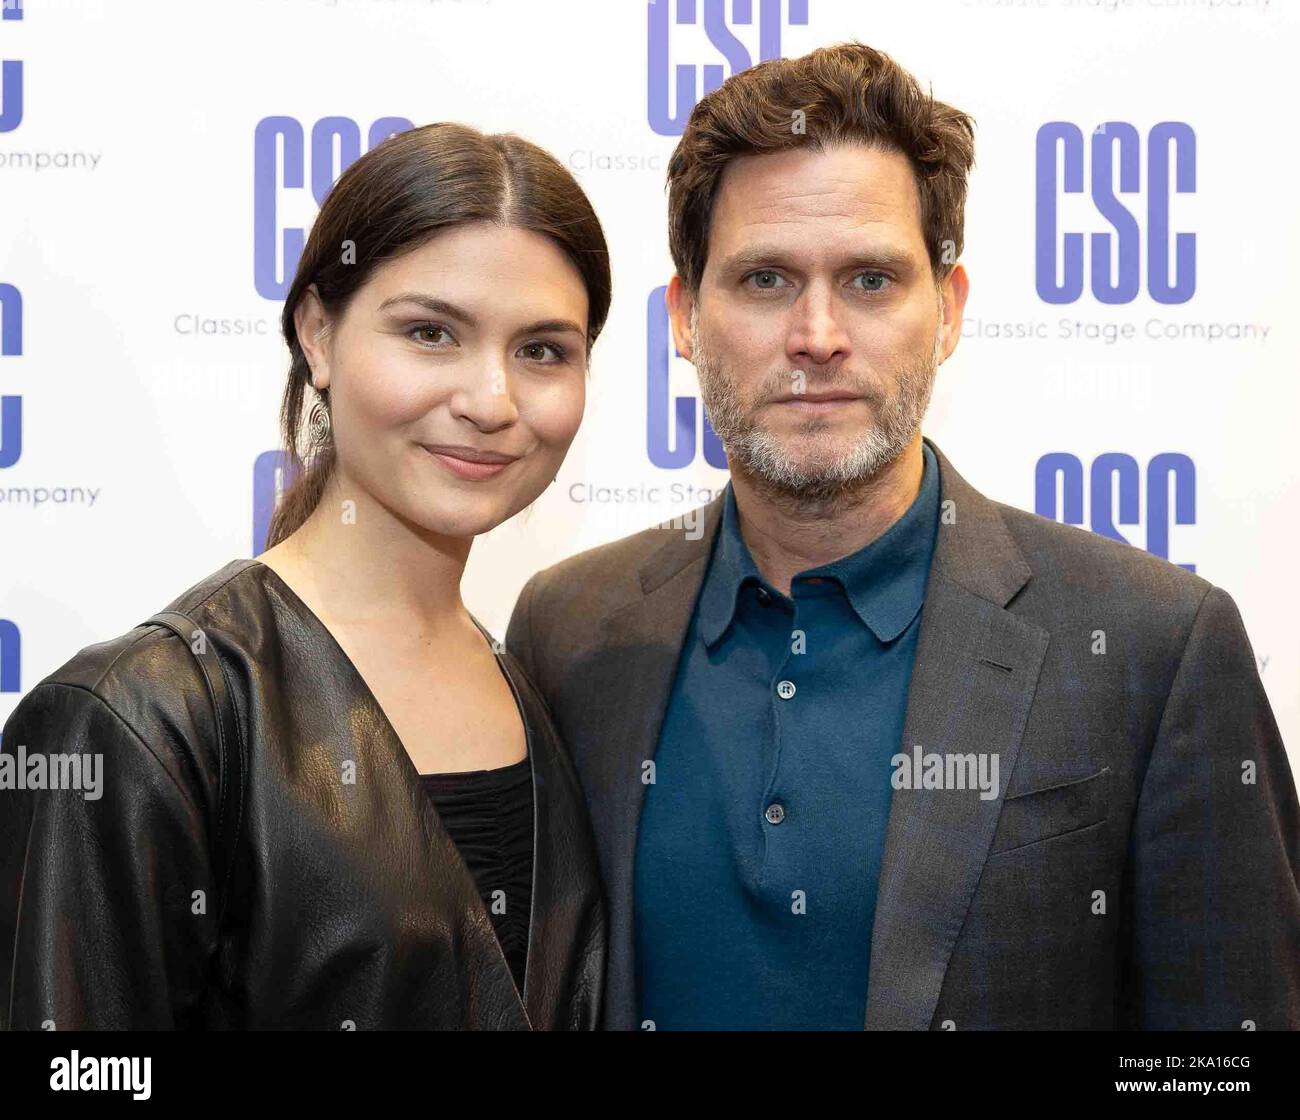 New York, NY, USA. 30th Oct, 2022. Phillipa Soo, Steven Pasquale in attendance for A MAN OF NO IMPORTANCE Opening Night on Broadway, Classic Stage Company, New York, NY October 30, 2022. Credit: Manoli Figetakis/Everett Collection/Alamy Live News Stock Photo